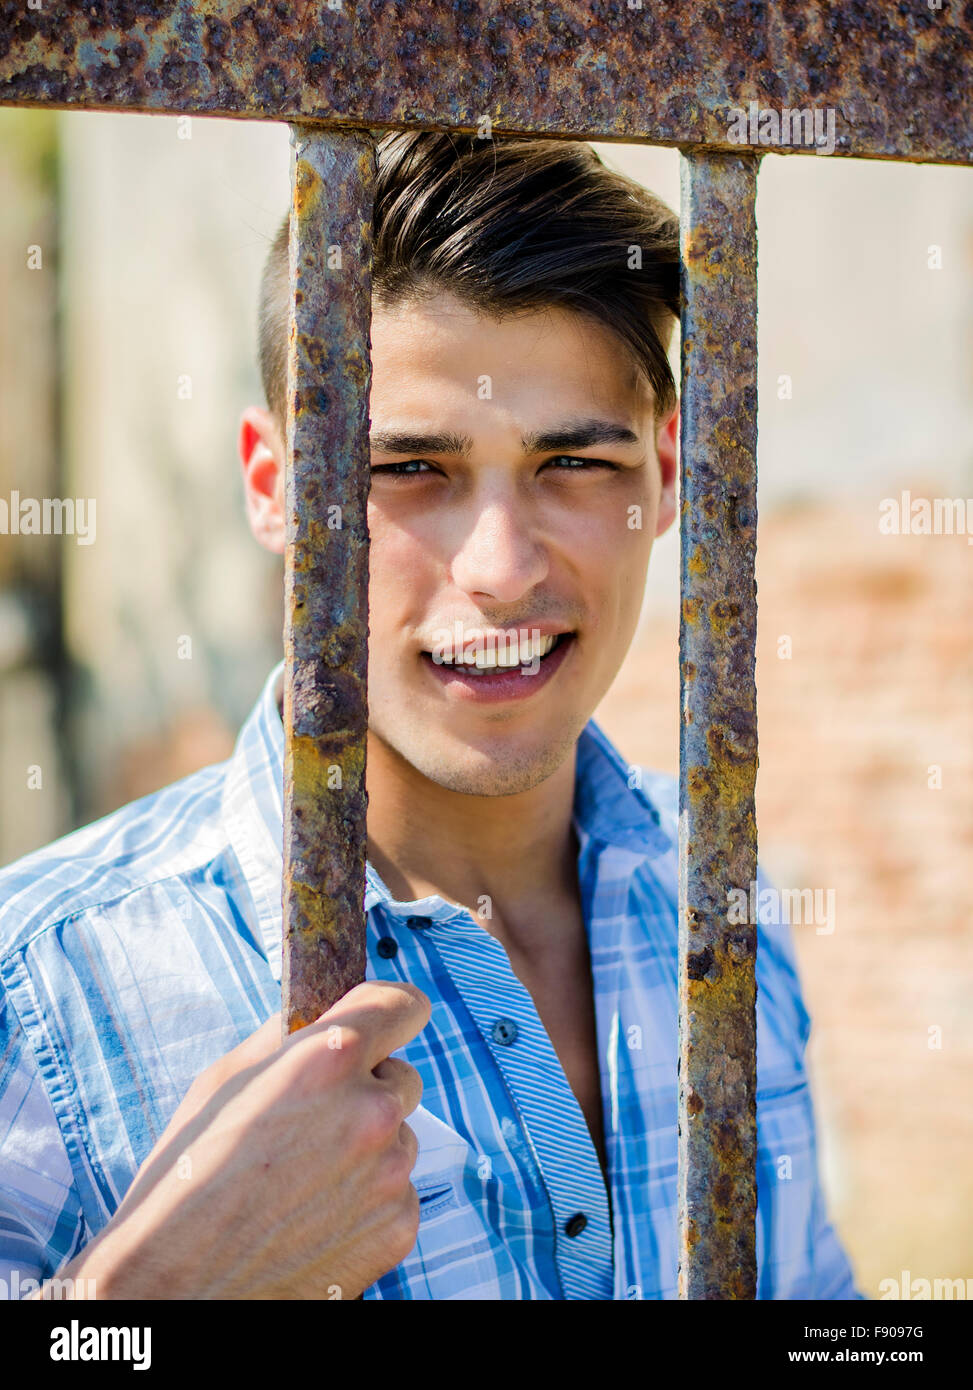 Handsome smiling black haired, blue eyed young man in shirt behind metal cage or gate bars Stock Photo